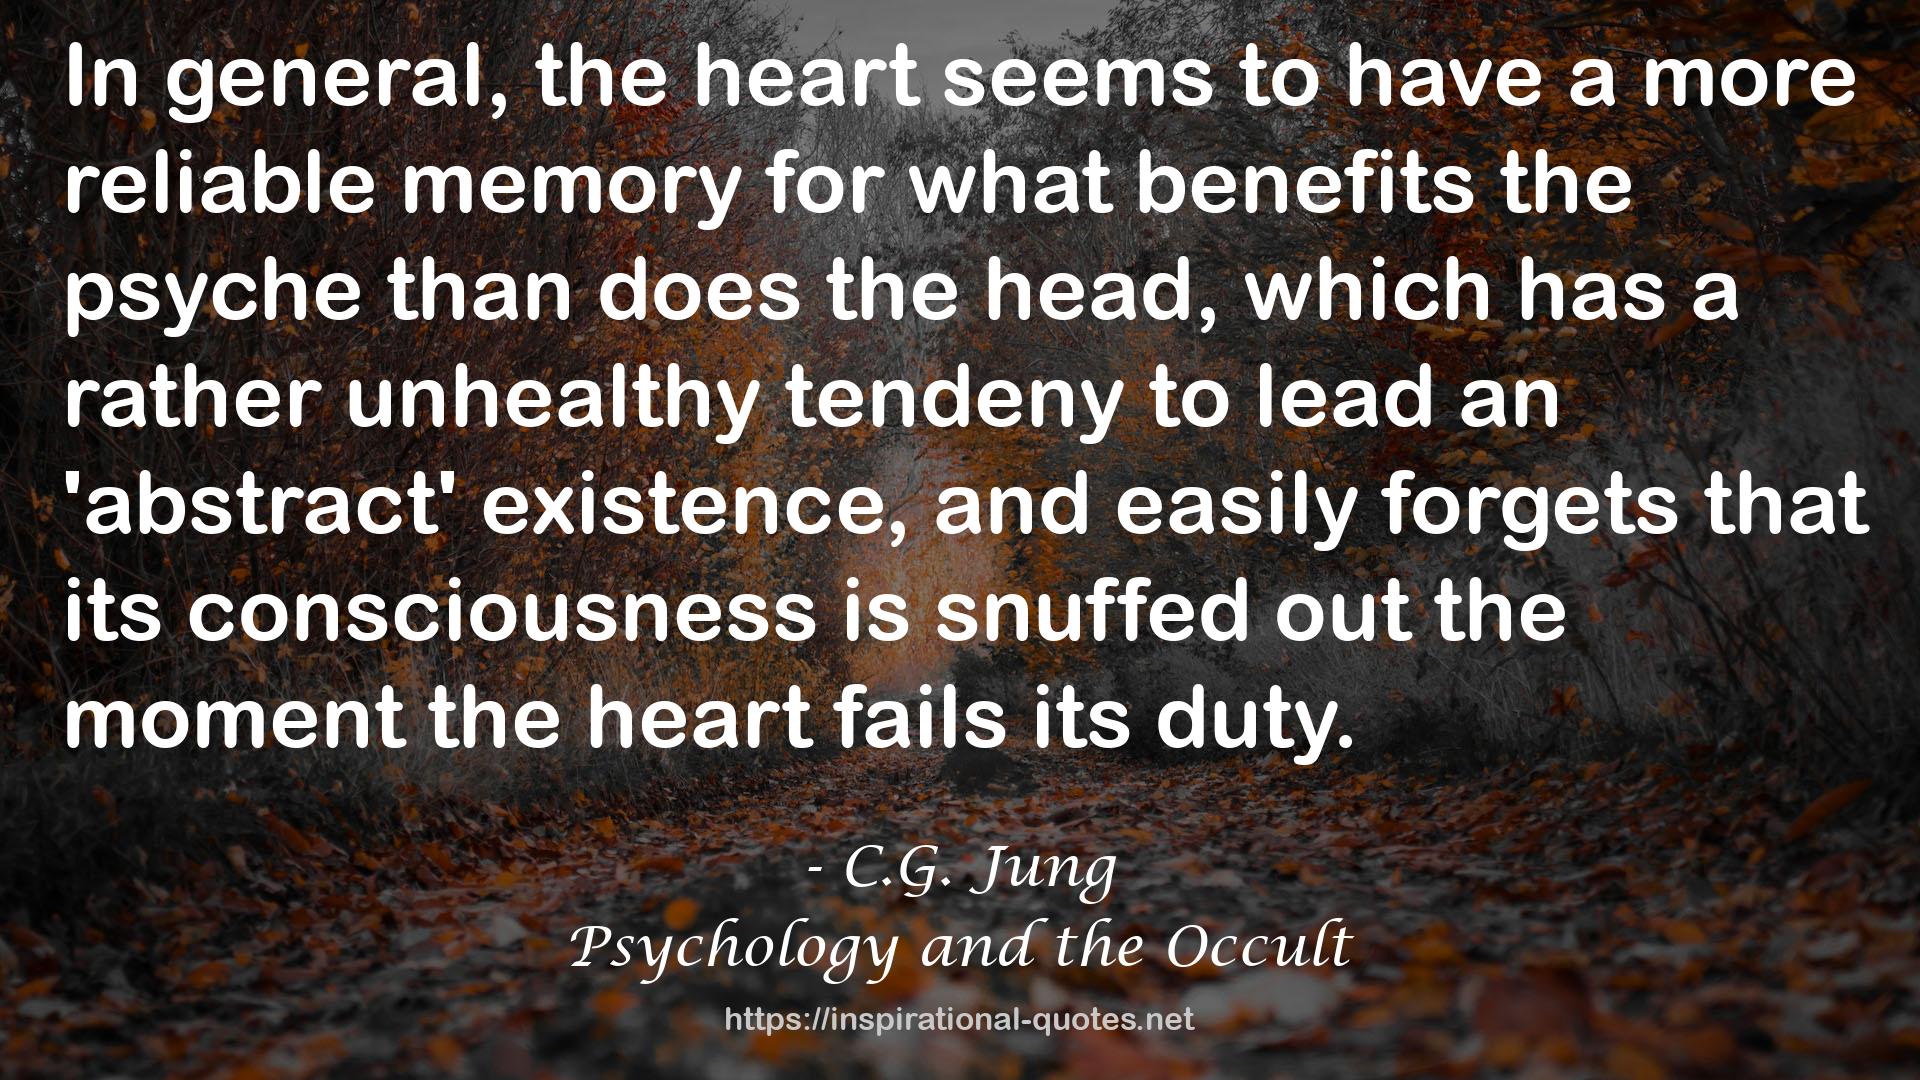 Psychology and the Occult QUOTES